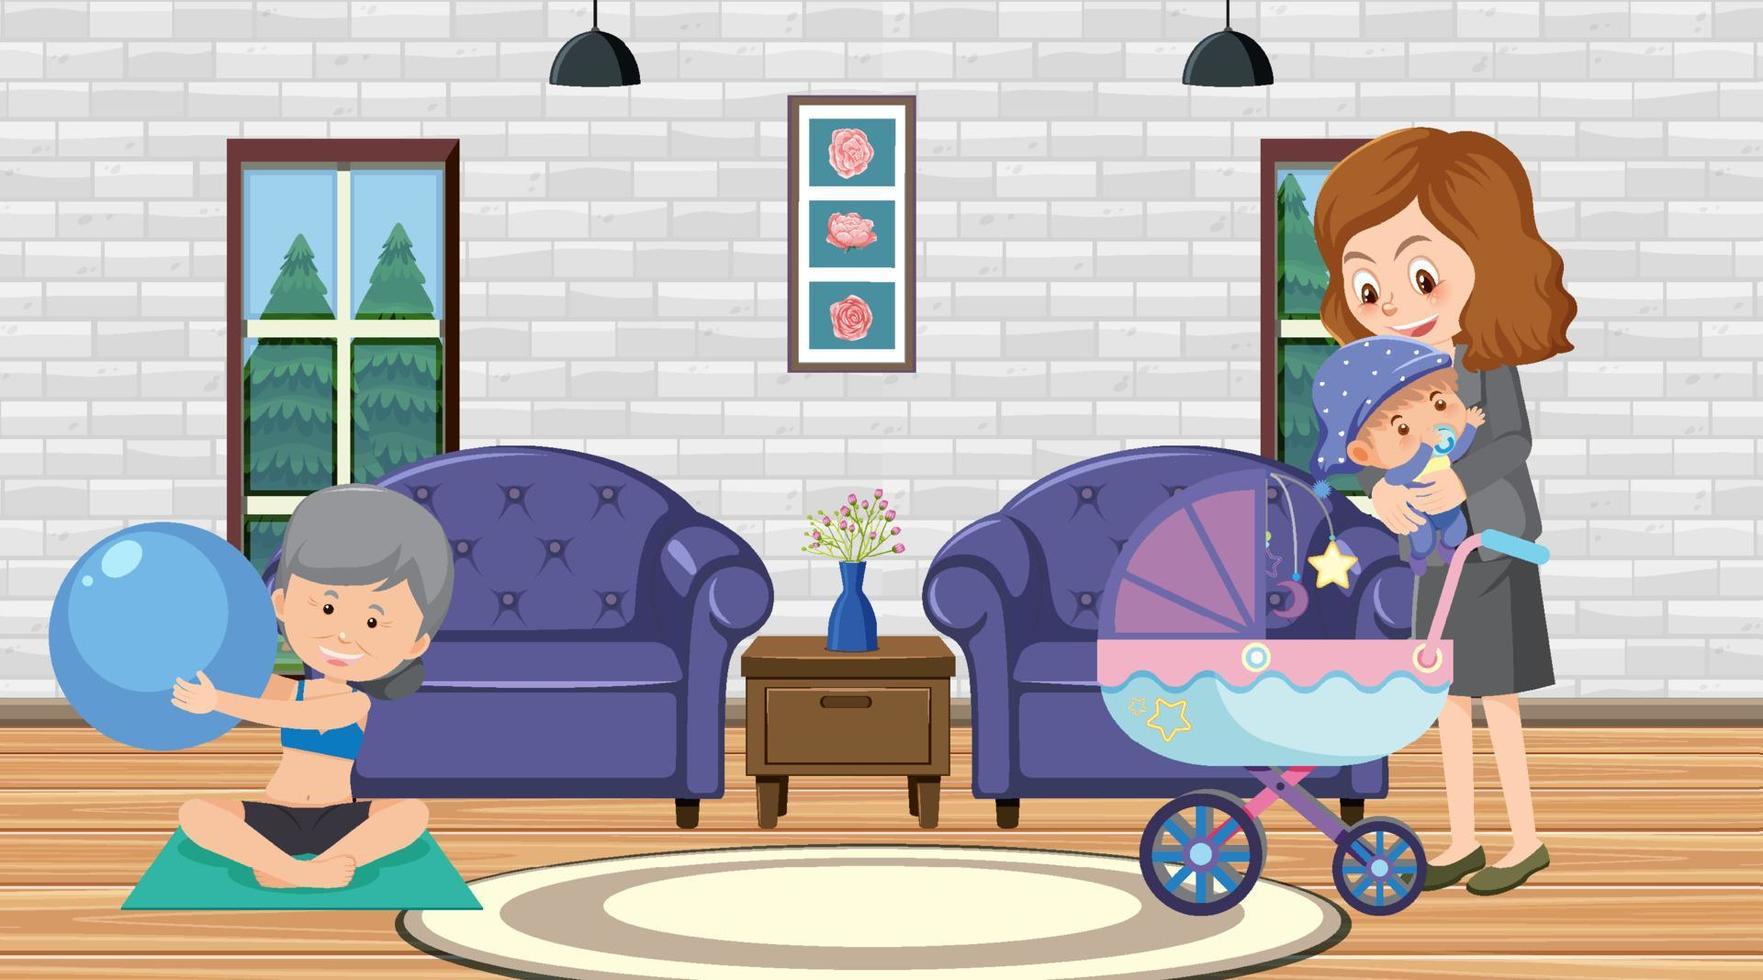 Doing different activities at home cartoon concept vector